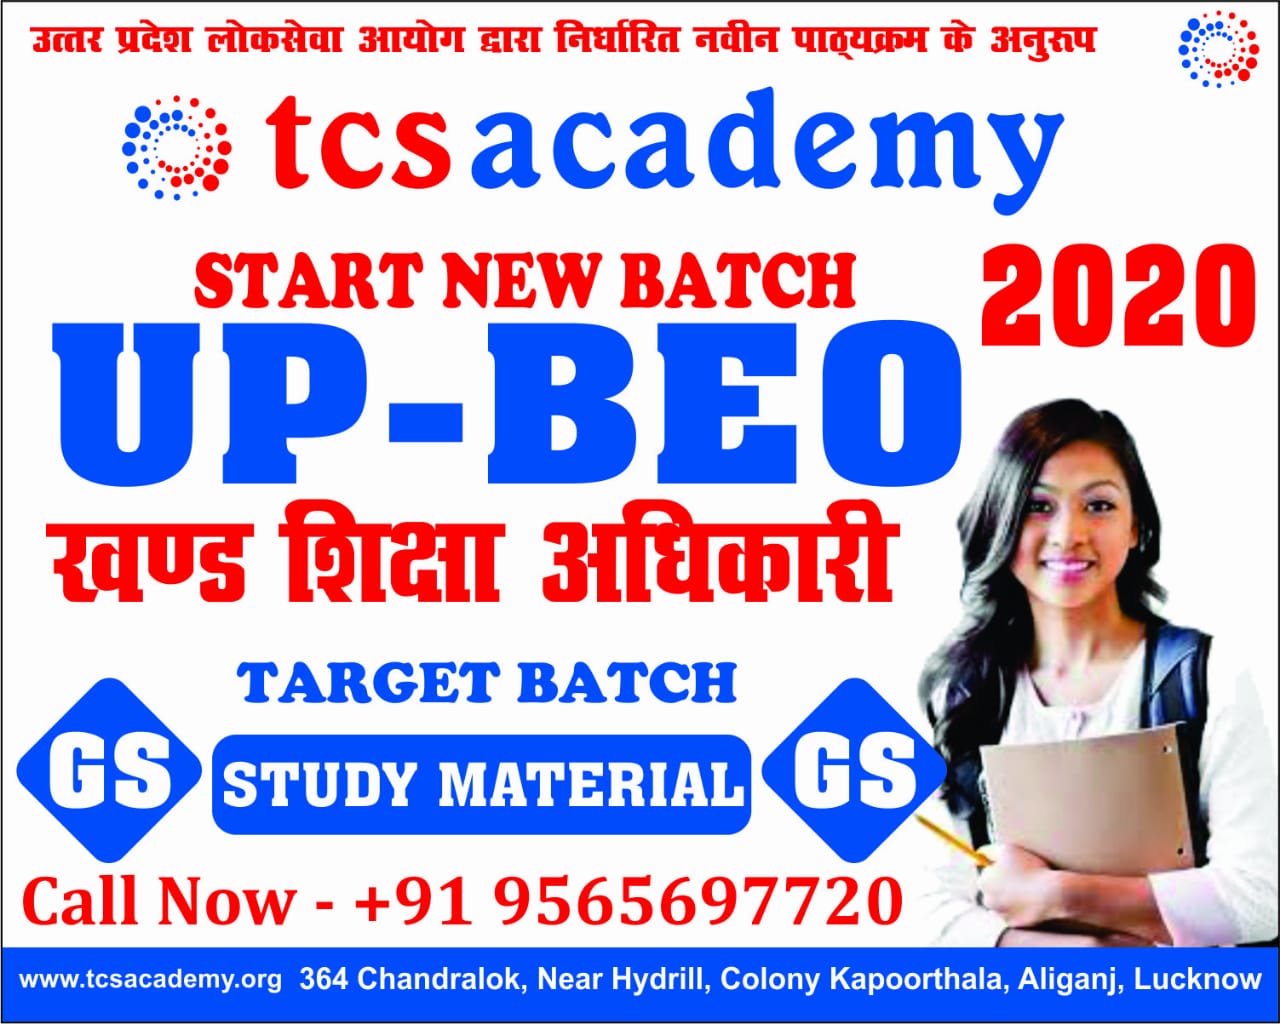 TCS ACADEMY-BEO GS FREE STUDY MATERIAL TCS ACADEMY-BEO GS FREE STUDY MATERIAL,UPPSC BEO EXAM 2020 STUDY MATERIAL, GS NOTES,PRE&MAINS FULL GS STUDY MATERIAL,BEO COACHING IN LUCKNOW UP Download Free Study Material For UP BEO EXAM Pre + Mains Exam. Syllabus: Paper-II: General Studies - I (Indian Heritage and Culture, History and Geography, Indian Polity, Indian Agriculture,Indian Economy,etc . We have listed notes for General Studies Students, who have been preparing for UPPSC BEO (BLOCK EDUCATION OFFICER) and UPPCS Exams. Study Material General Studies.BEO COACHING IN LUCKNOW,UPPCS COACHING IN LUCKNOW,PCS COACHING IN LUCKNOW BY EXPERTS: Study material for UP BEO EXAM Prelims 2020, UP BEO EXAM Main 2020, and other State Civil services Exam for complete preparation of all UPPCS Exams. ... General Studies PCS 2020 Complete Study Package. PCS Prelims Study Material: Find PCS Prelims Exam Study Materials Online on India's No.1 ... form link, Eligibility, Selection Procedure, exam pattern, Free Study Material, and salary. ... PCS Prelims Exam 2020 : GS Polity : Study Material. UPPSC BEO Prelims Series (Postal Course): Get The Only Self-Contained Correspondence Course. ... General Studies for Uttar Pradesh BEO EXAM 2020: Comprehensive, point-wise and updated study material and exam notes. Uttar Pradesh BEO EXAM: Latest Notifications, Dates, Updates, News & More, FREE STUDY MATERIAL FOR ALL STUDENTS ( FULL SUMMARY NOTES GIST ... GK GS REVISION NOTES GIST PCS UPPSC BEO EXAM 2020.